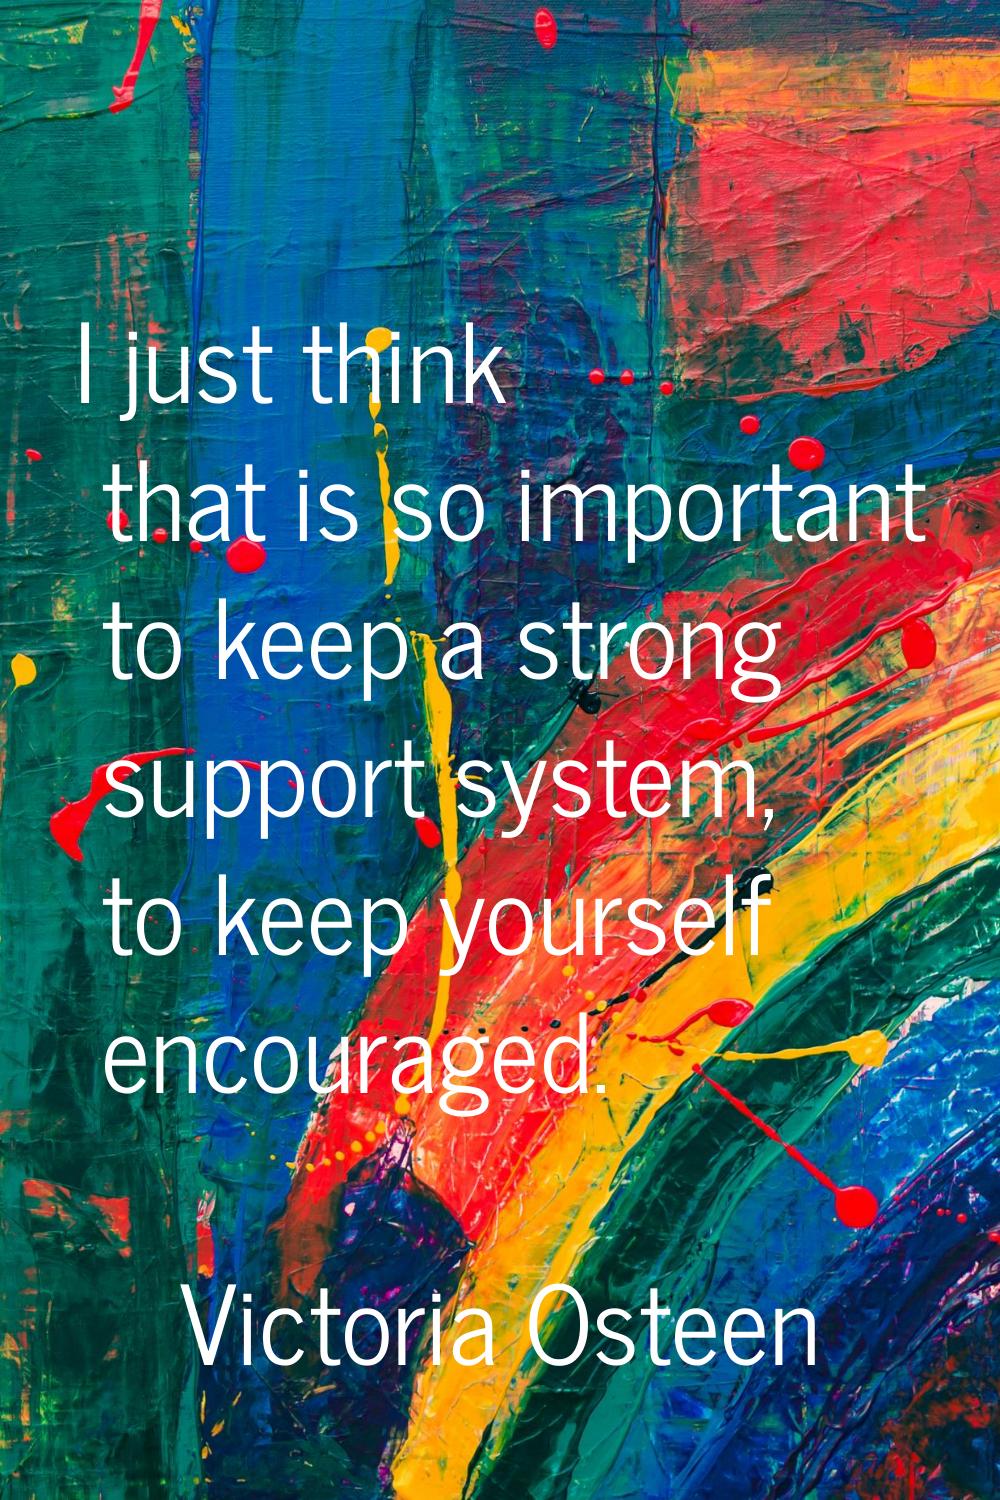 I just think that is so important to keep a strong support system, to keep yourself encouraged.